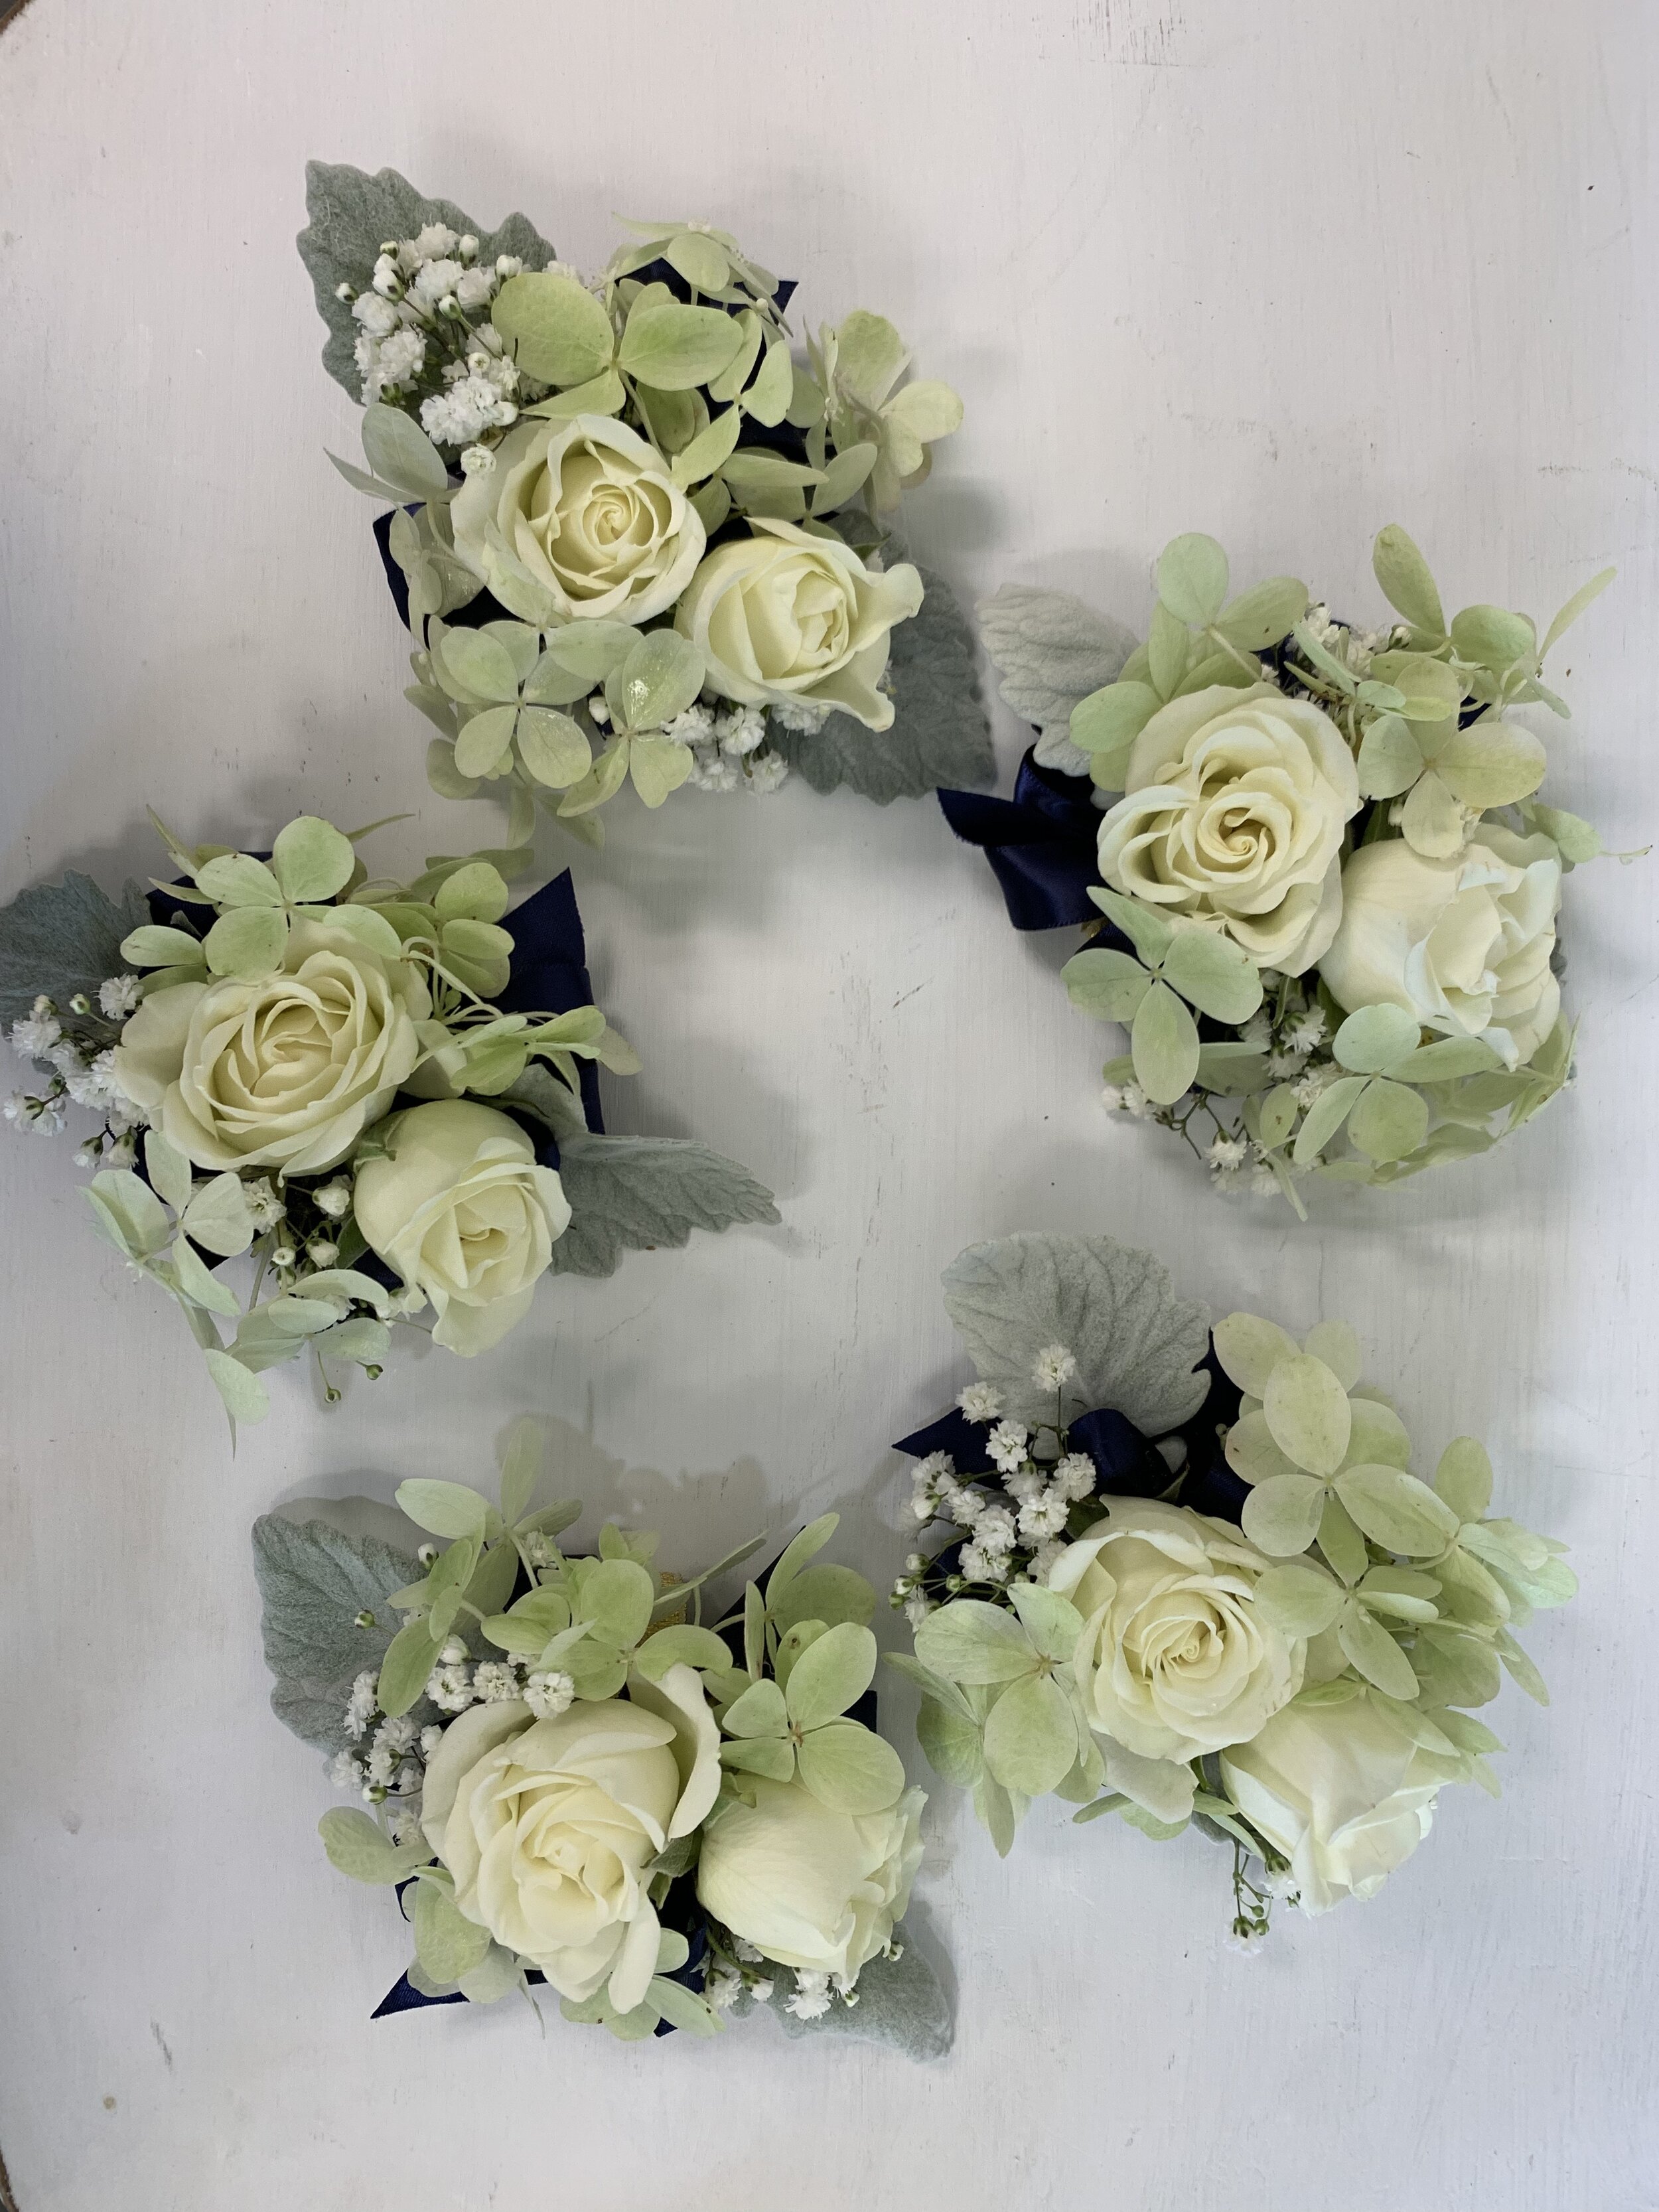 Wrist Corsage White Roses and Limelight Hydrangea.jpg